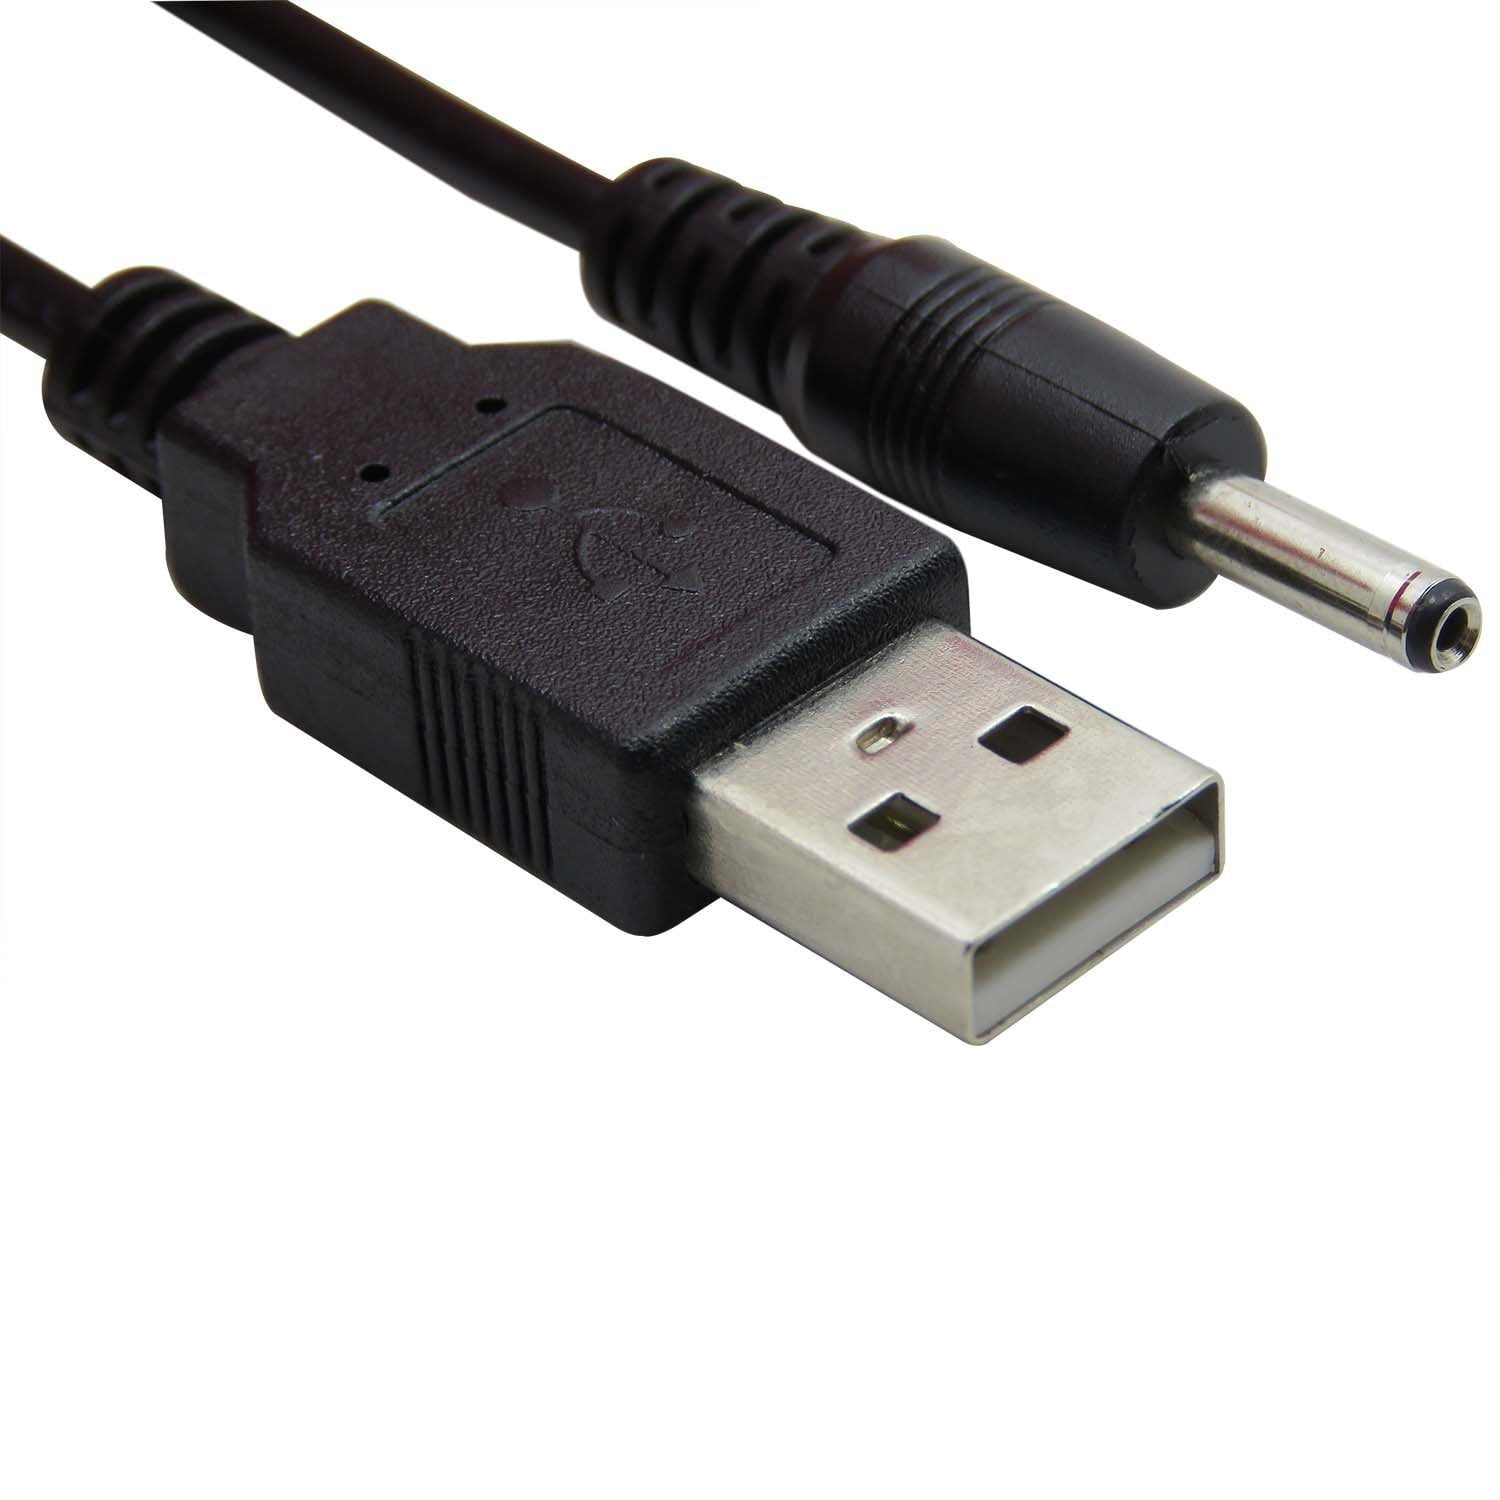 USB 5v Charger Cable Compatible with  BT Video 3000 Parent's Unit Baby Monitor 